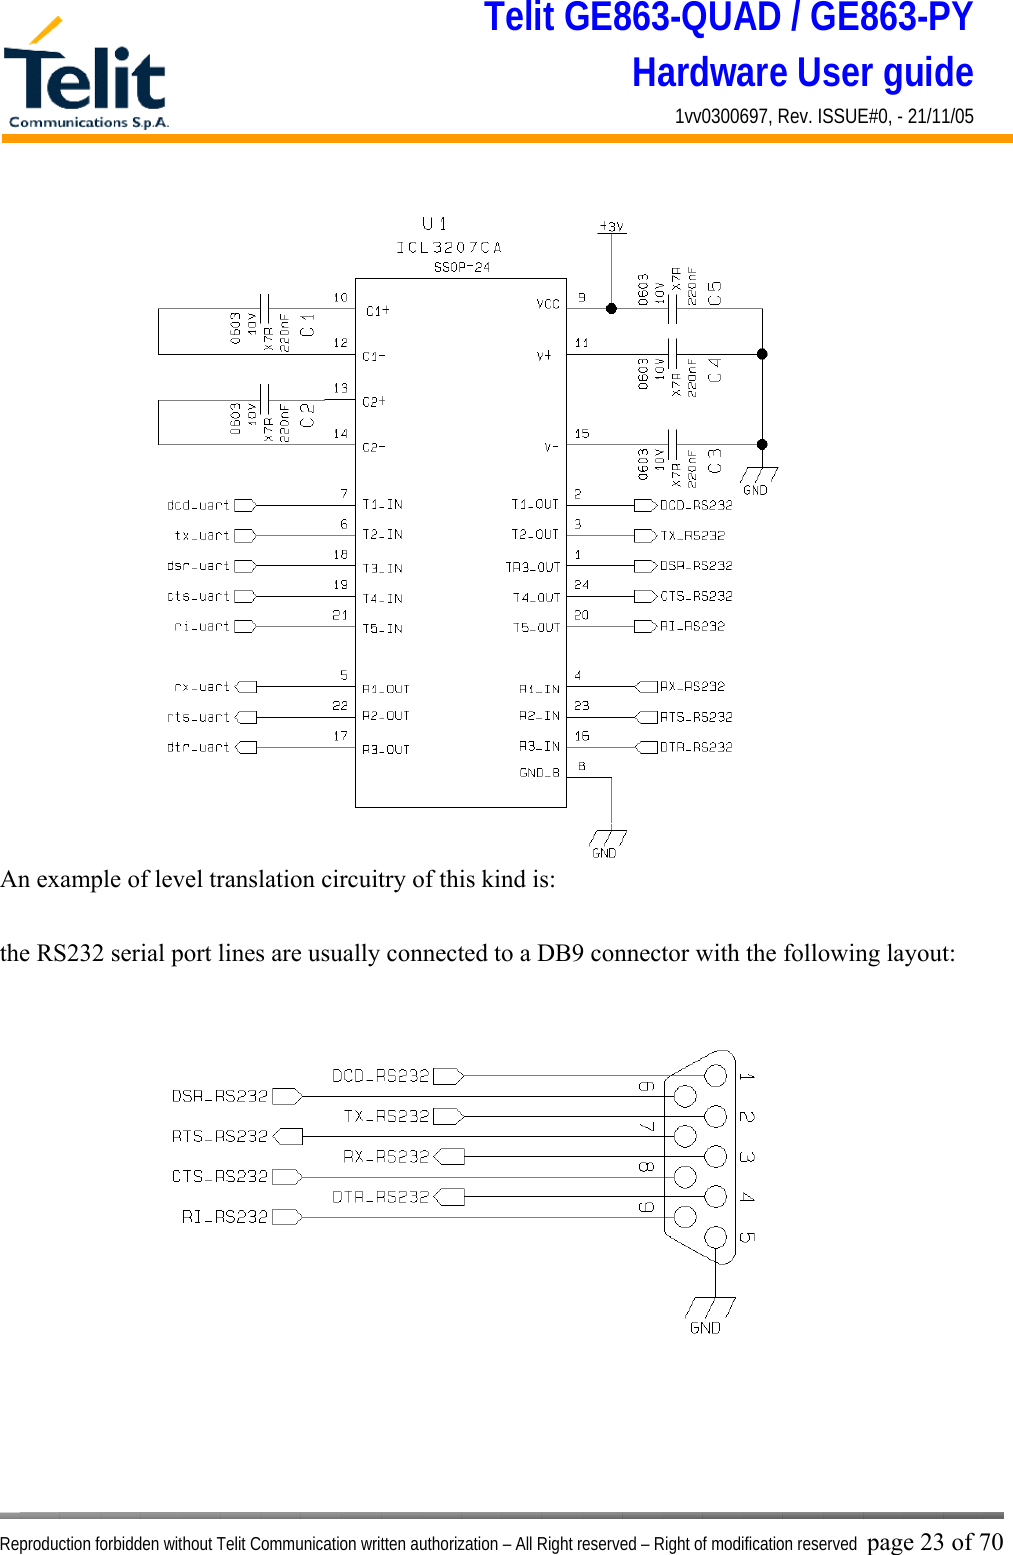 Telit GE863-QUAD / GE863-PY Hardware User guide 1vv0300697, Rev. ISSUE#0, - 21/11/05    Reproduction forbidden without Telit Communication written authorization – All Right reserved – Right of modification reserved page 23 of 70 An example of level translation circuitry of this kind is:  the RS232 serial port lines are usually connected to a DB9 connector with the following layout: 